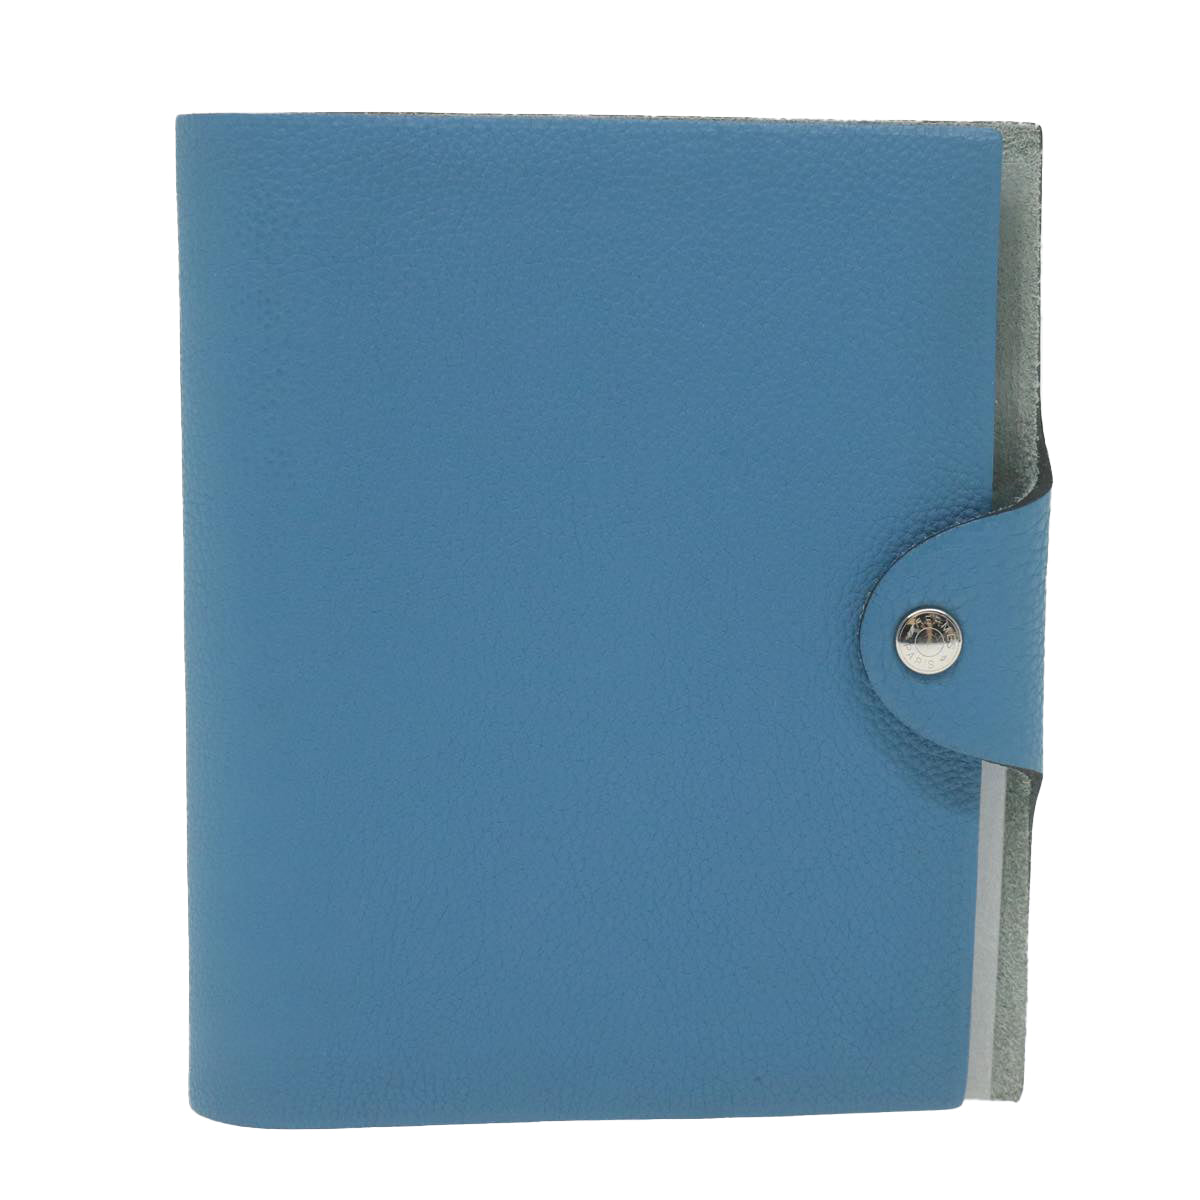 HERMES Yuris PM Day Planner Cover Leather Blue Auth ar11070 - 0